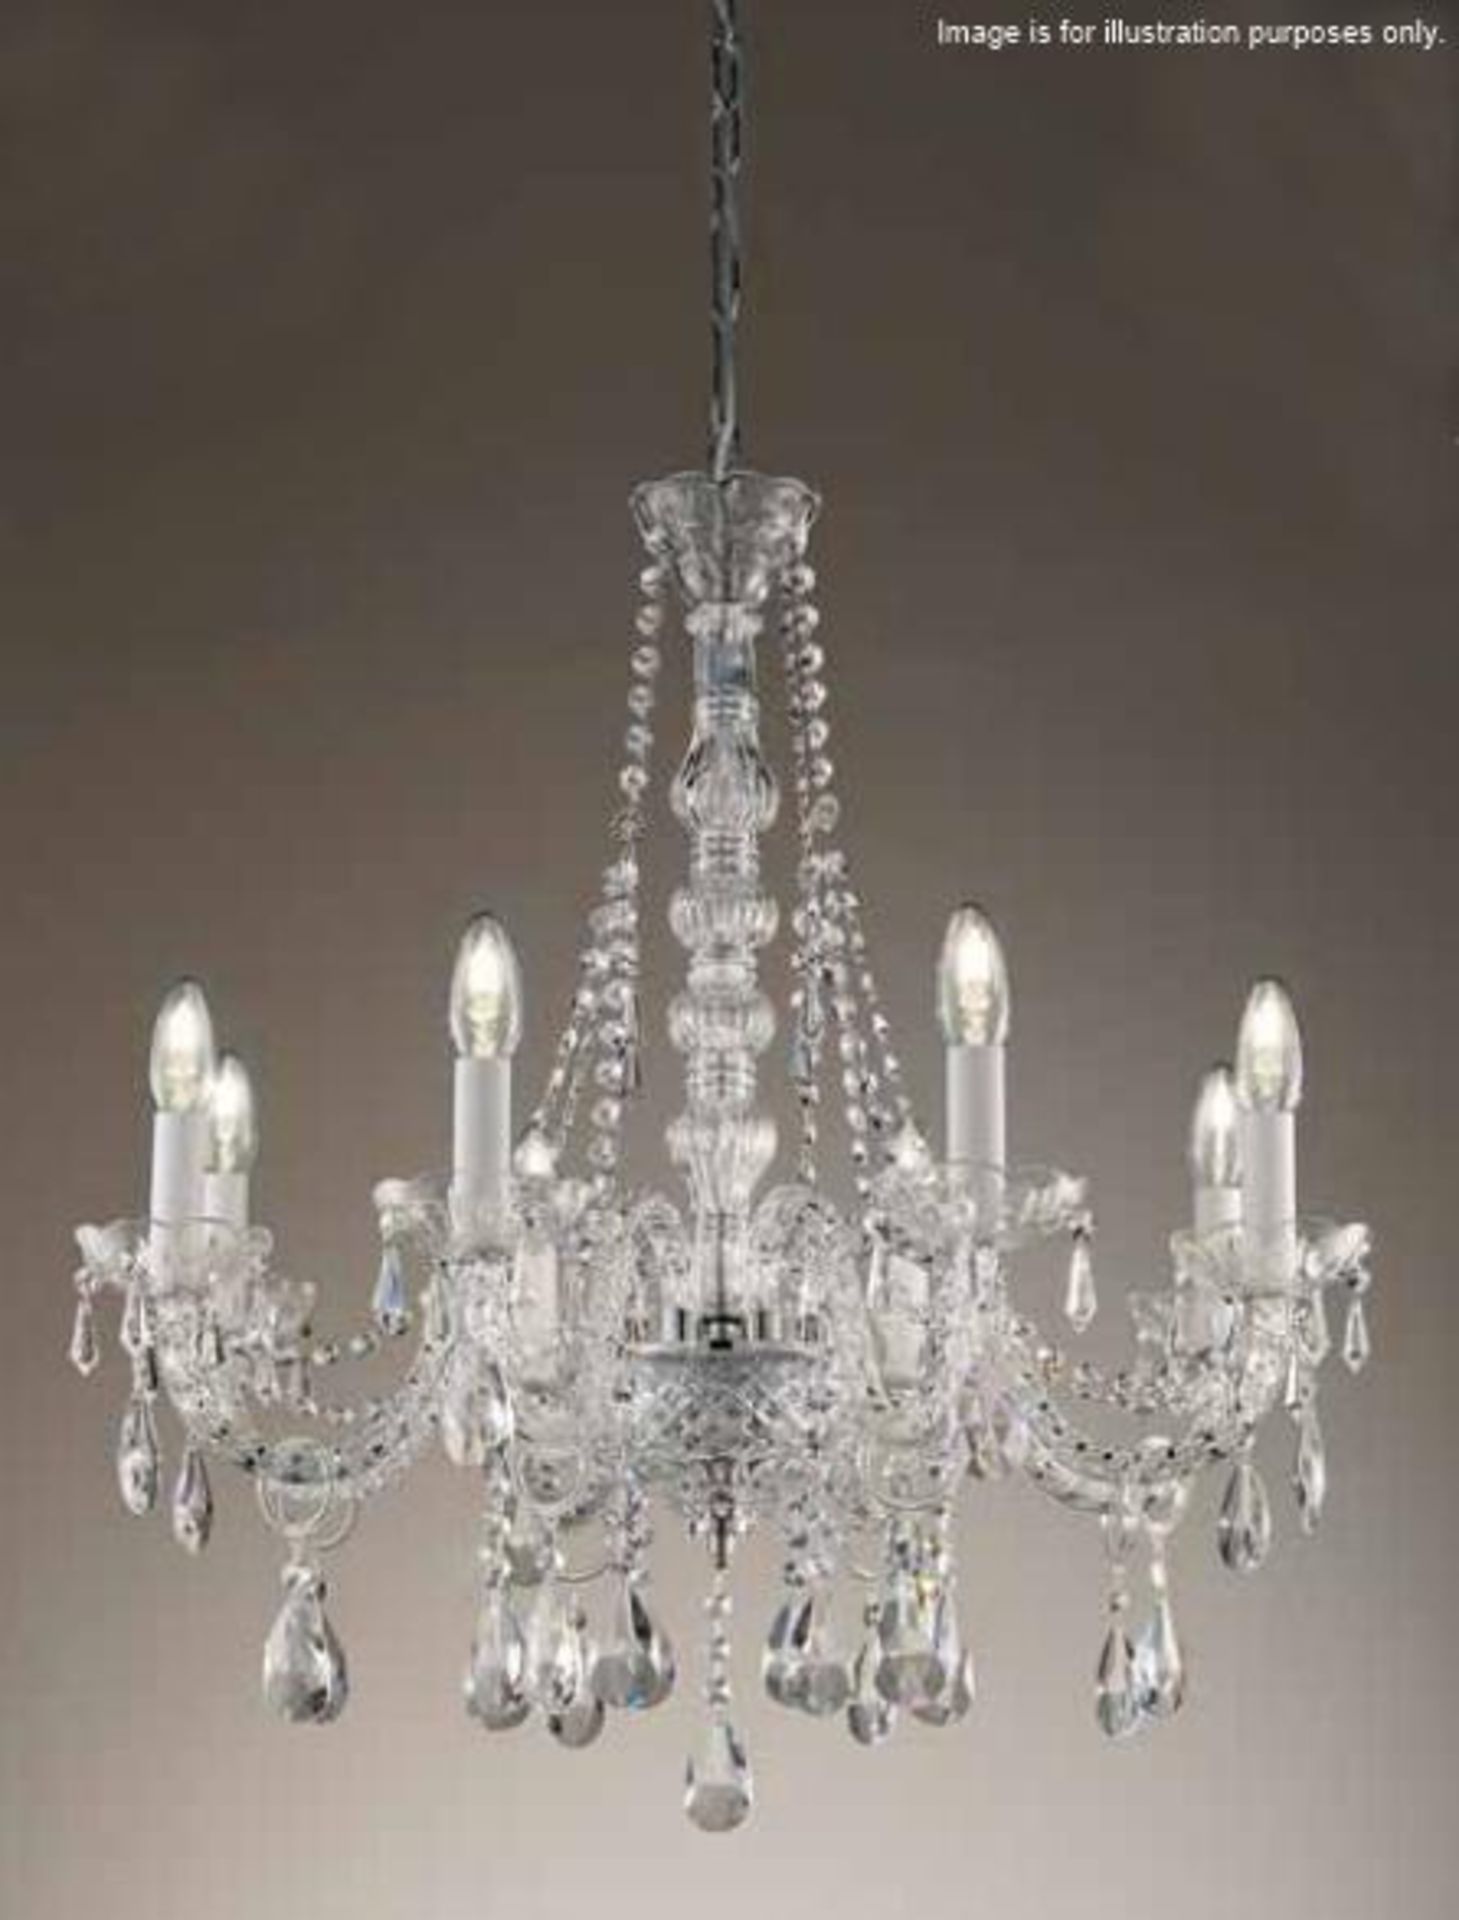 1 x BALLROOM Chandelier 8-Light Fitting - Unused Boxed Stock - CL001 - Product Code: BR/507/8 (P42)